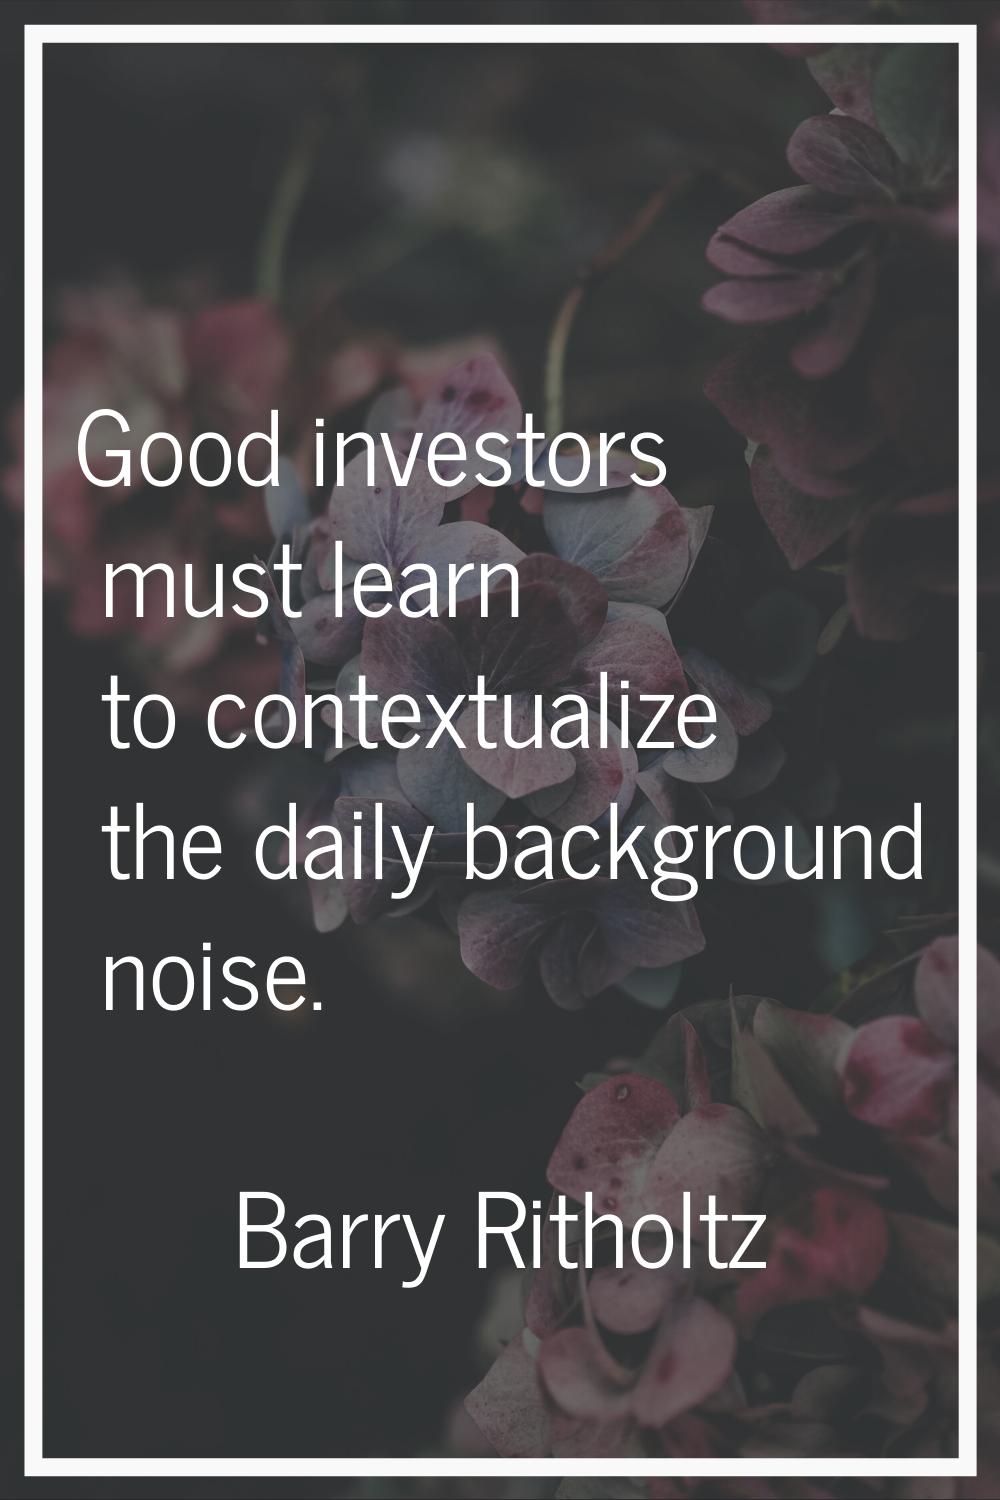 Good investors must learn to contextualize the daily background noise.